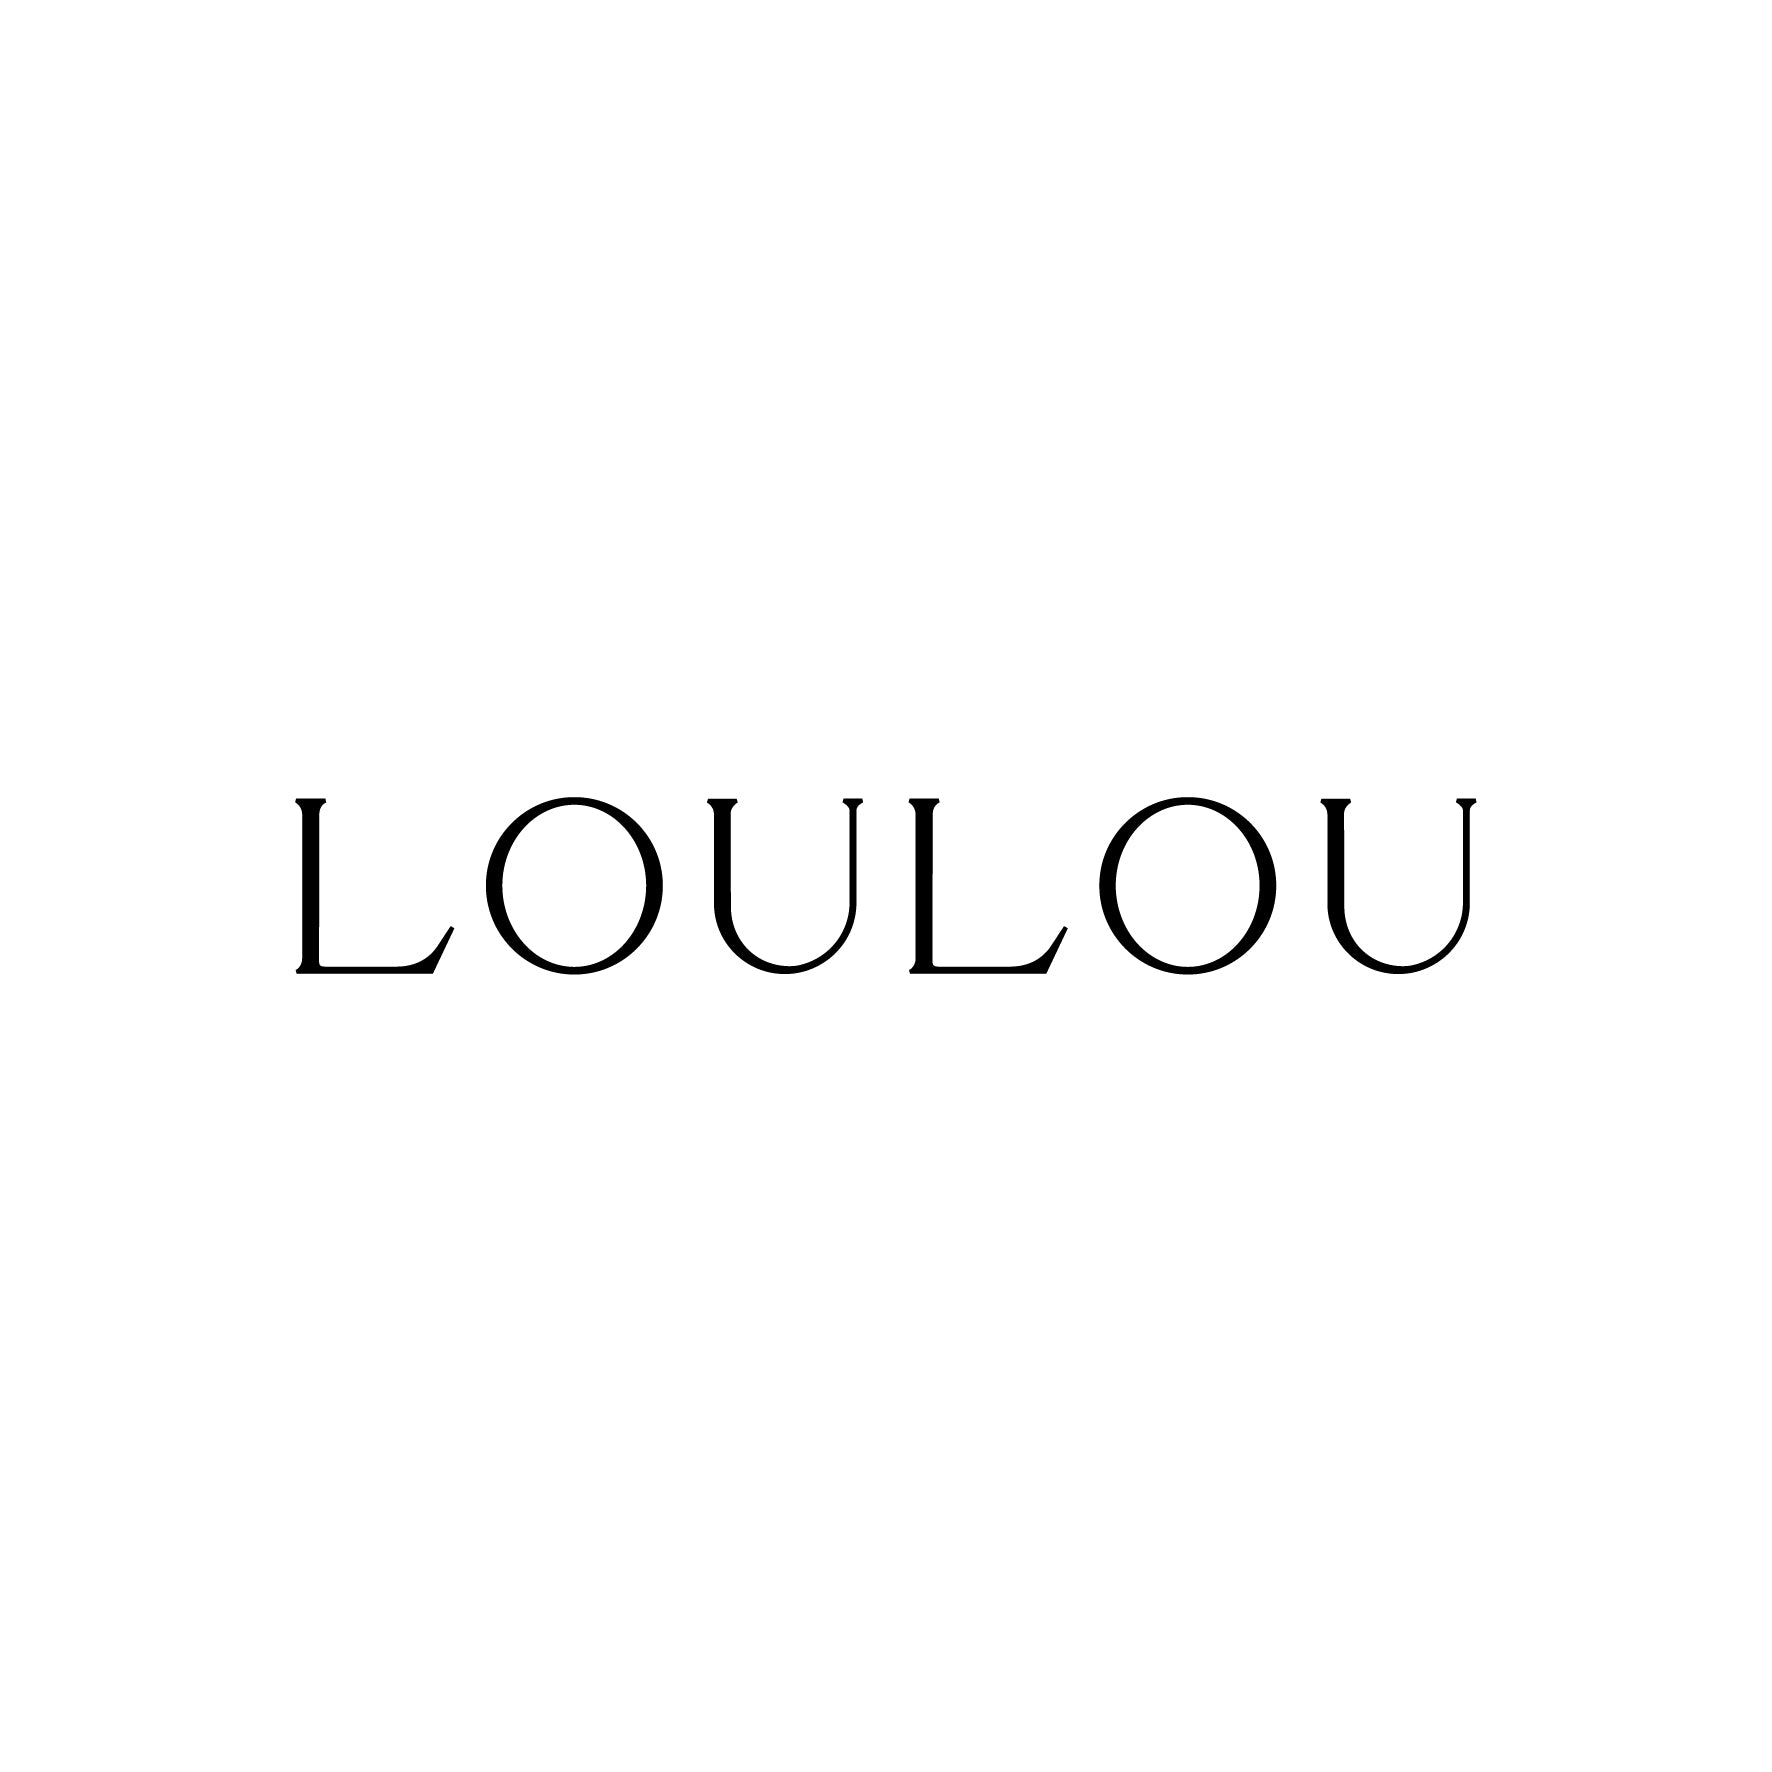 Loulou Brand Tops, Contemporary Ready to Wear